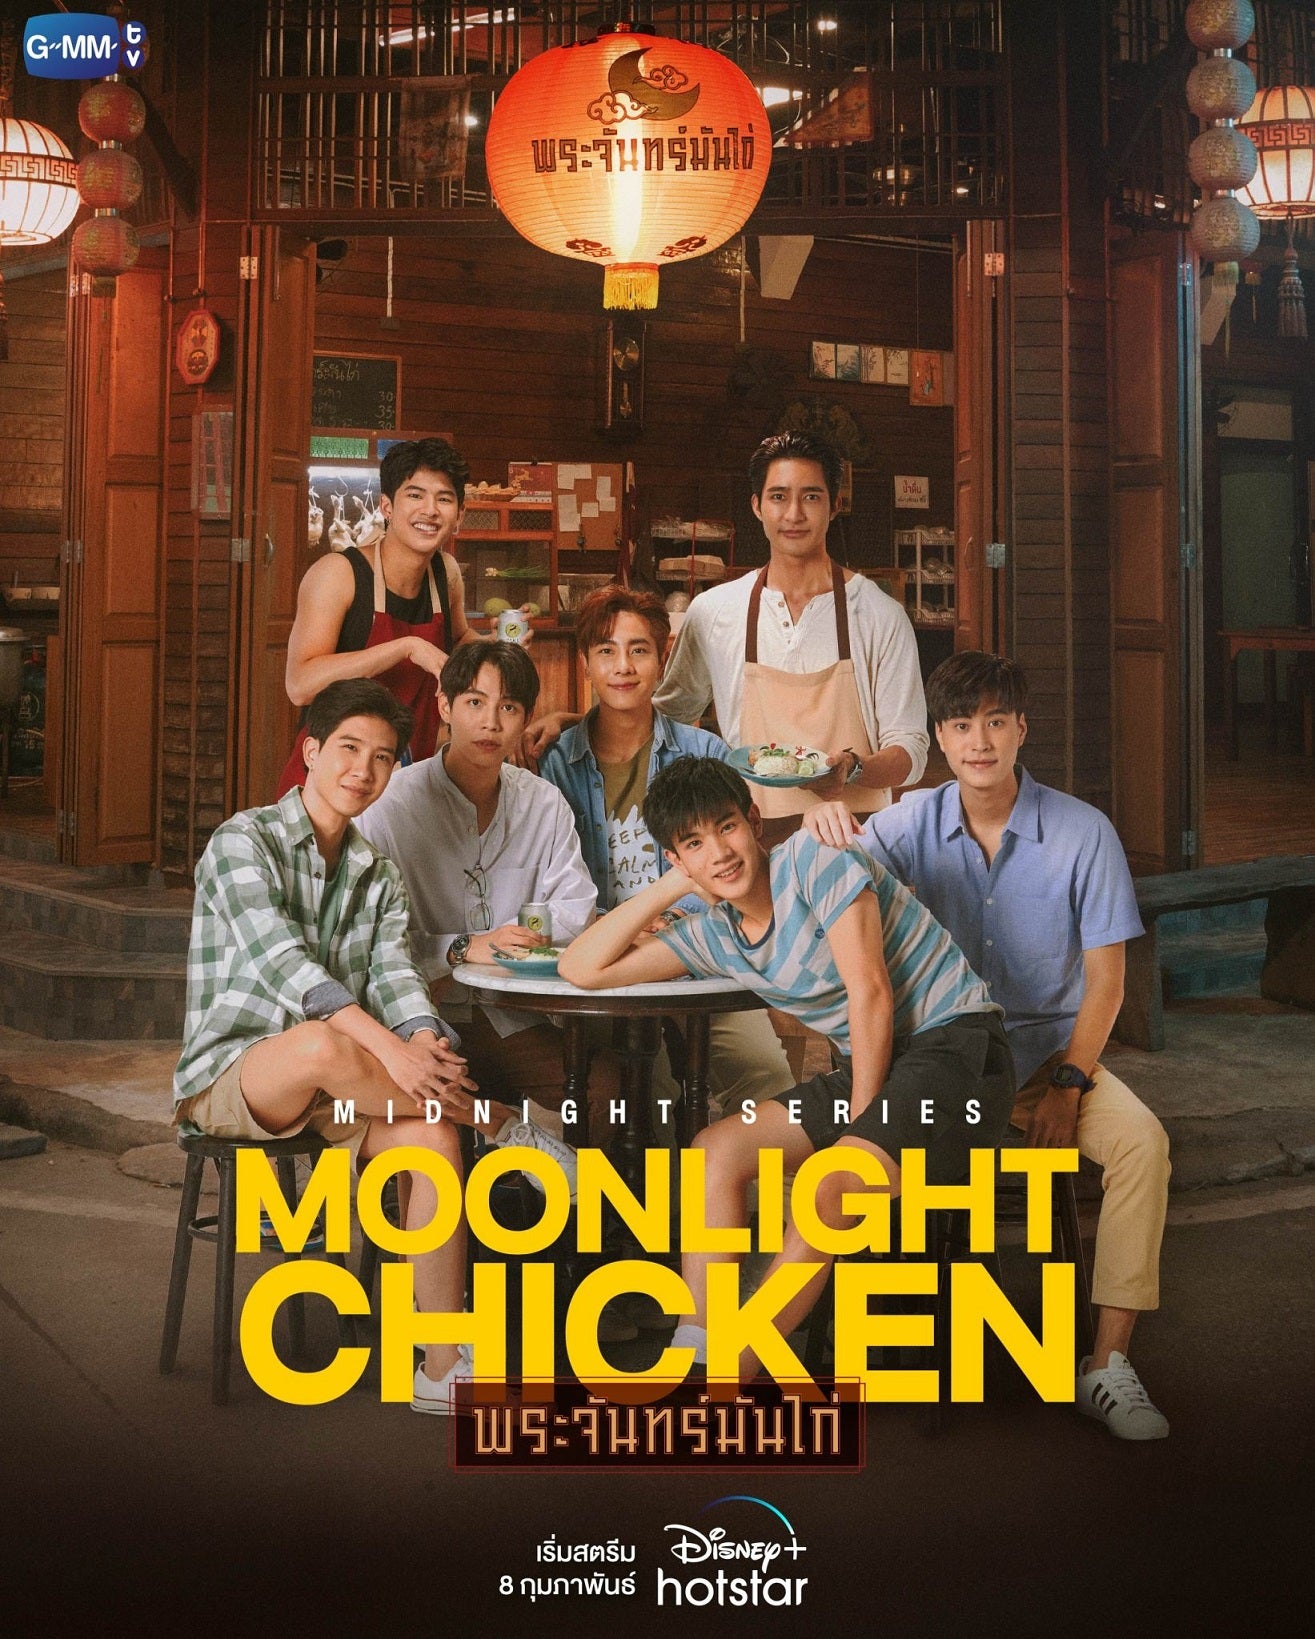 TV ratings for Moonlight Chicken (Midnight Series : Moonlight Chicken พระจันทร์มันไก่) in the United States. GMM 25 TV series